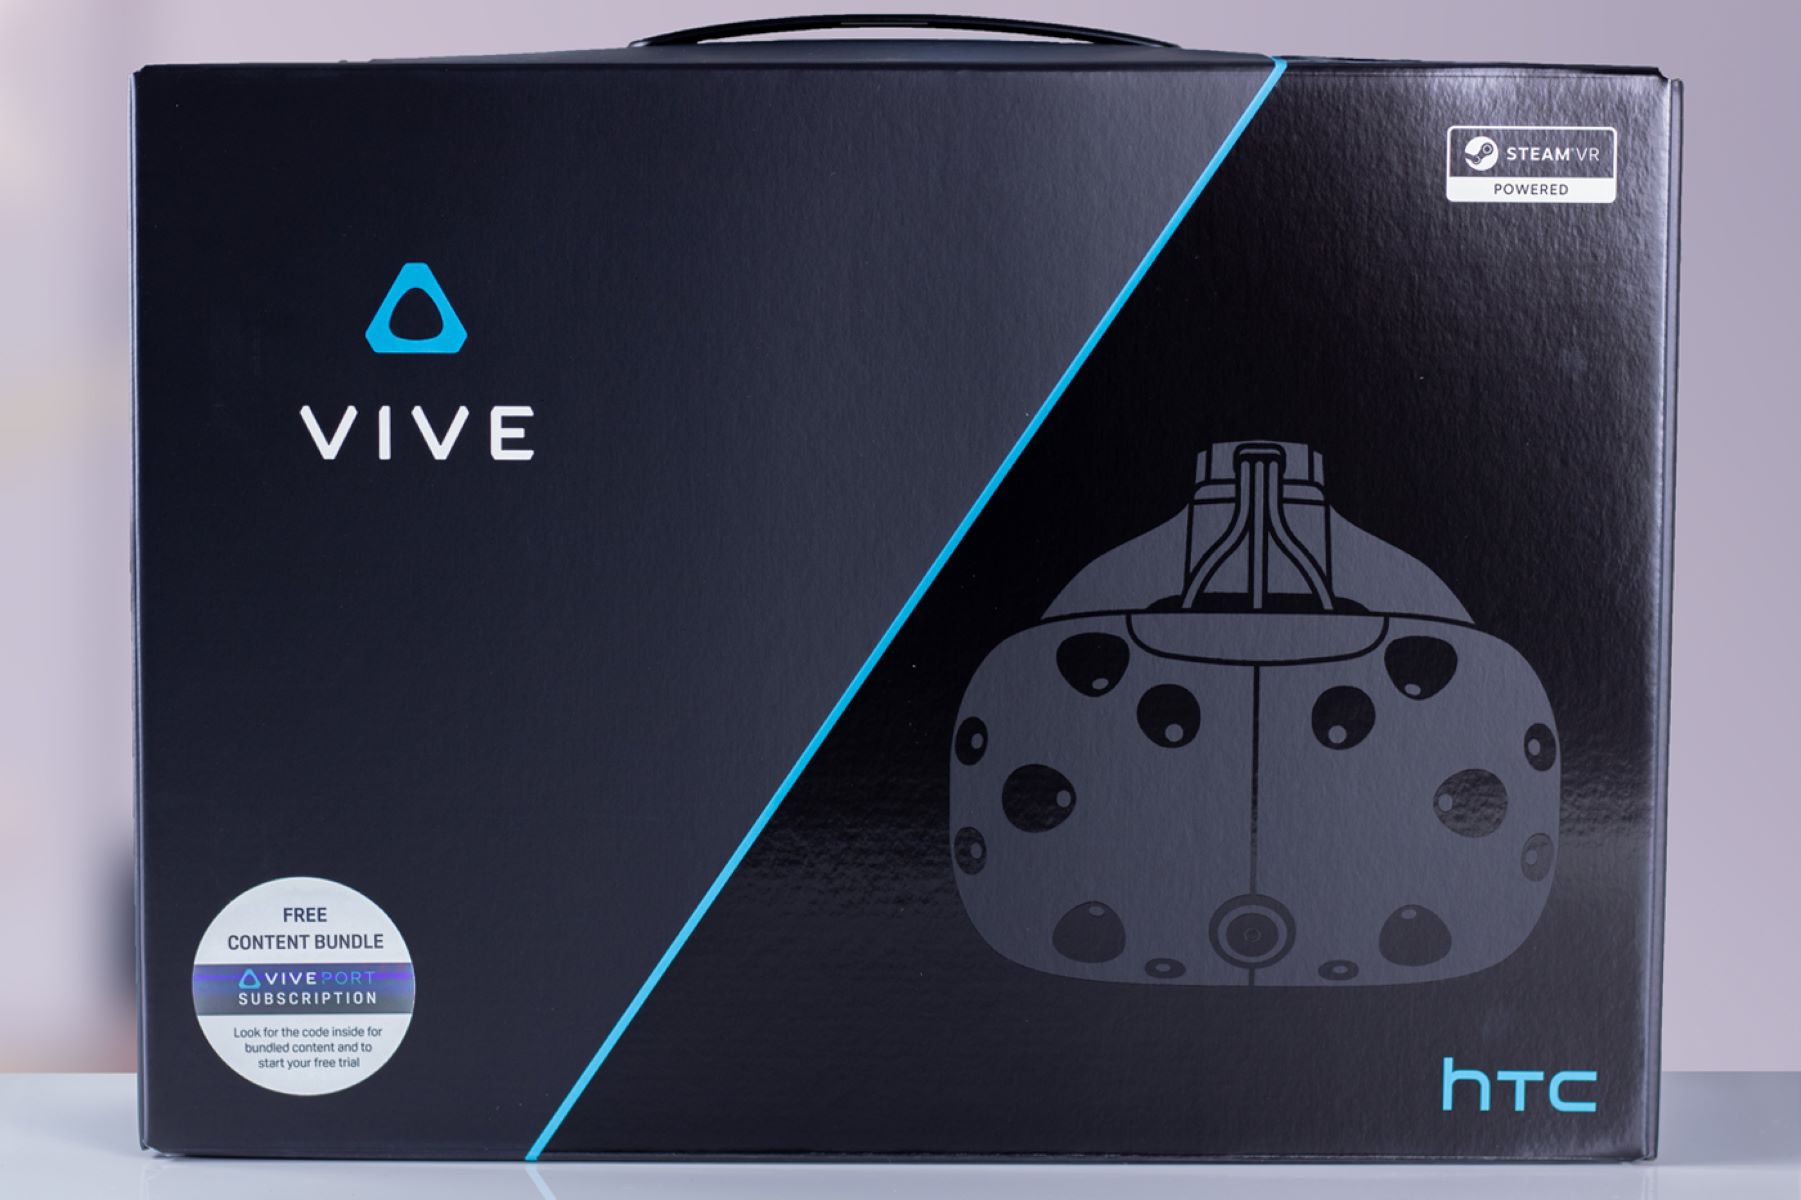 How Big Is The HTC Vive Box